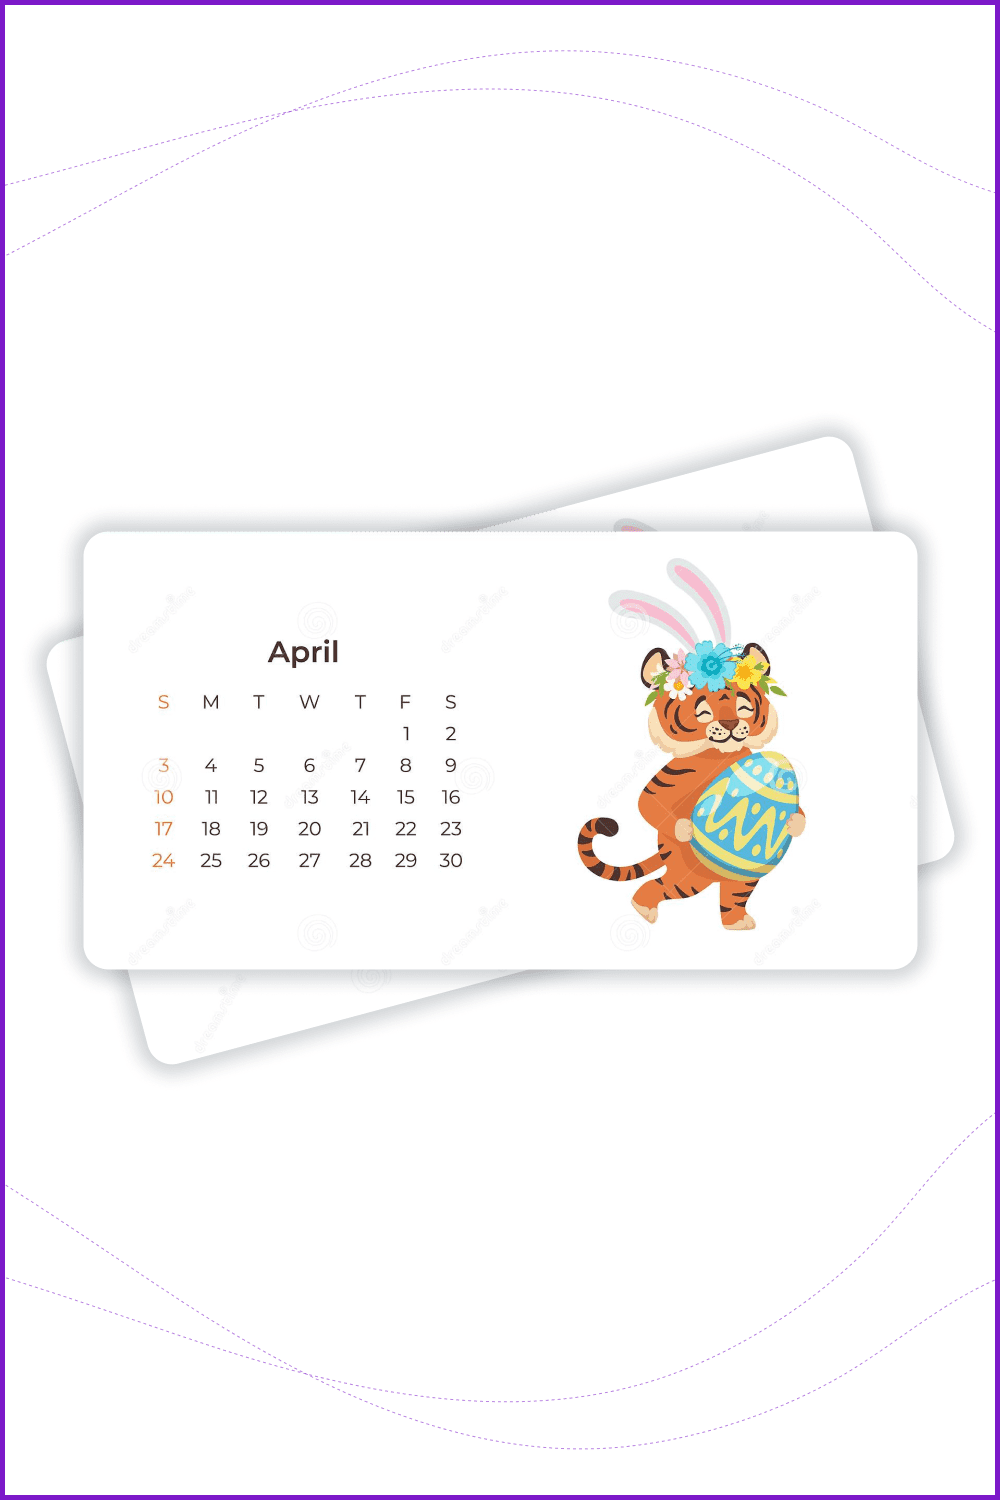 Funny calendar with dancing tiger.